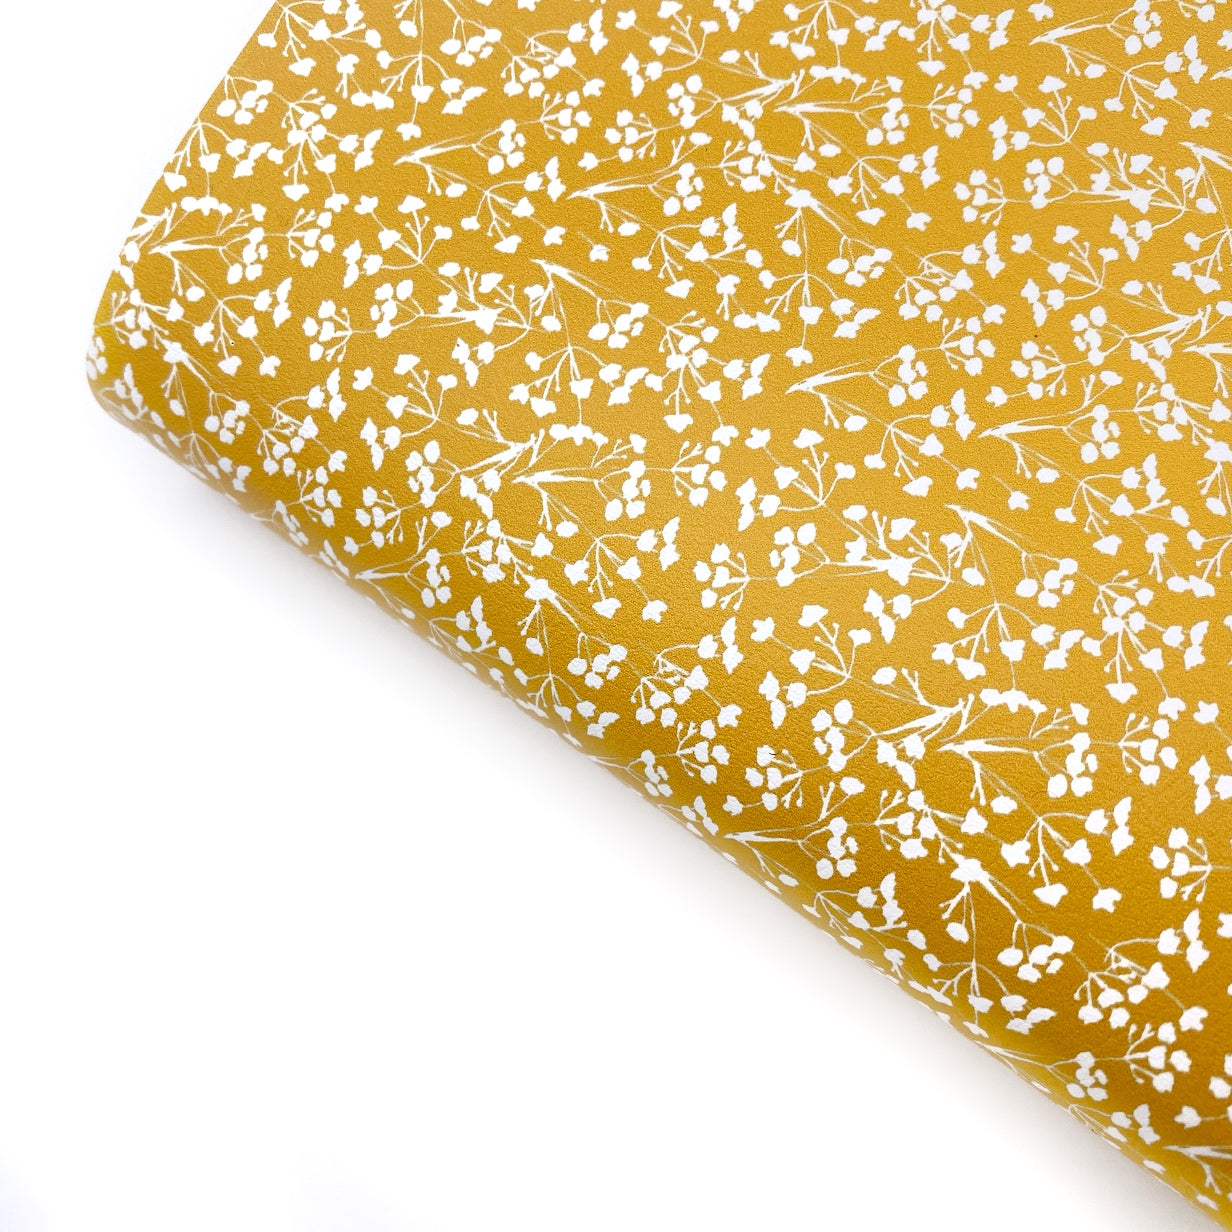 Mustard Wild Fields Premium Faux Leather Fabric Sheets